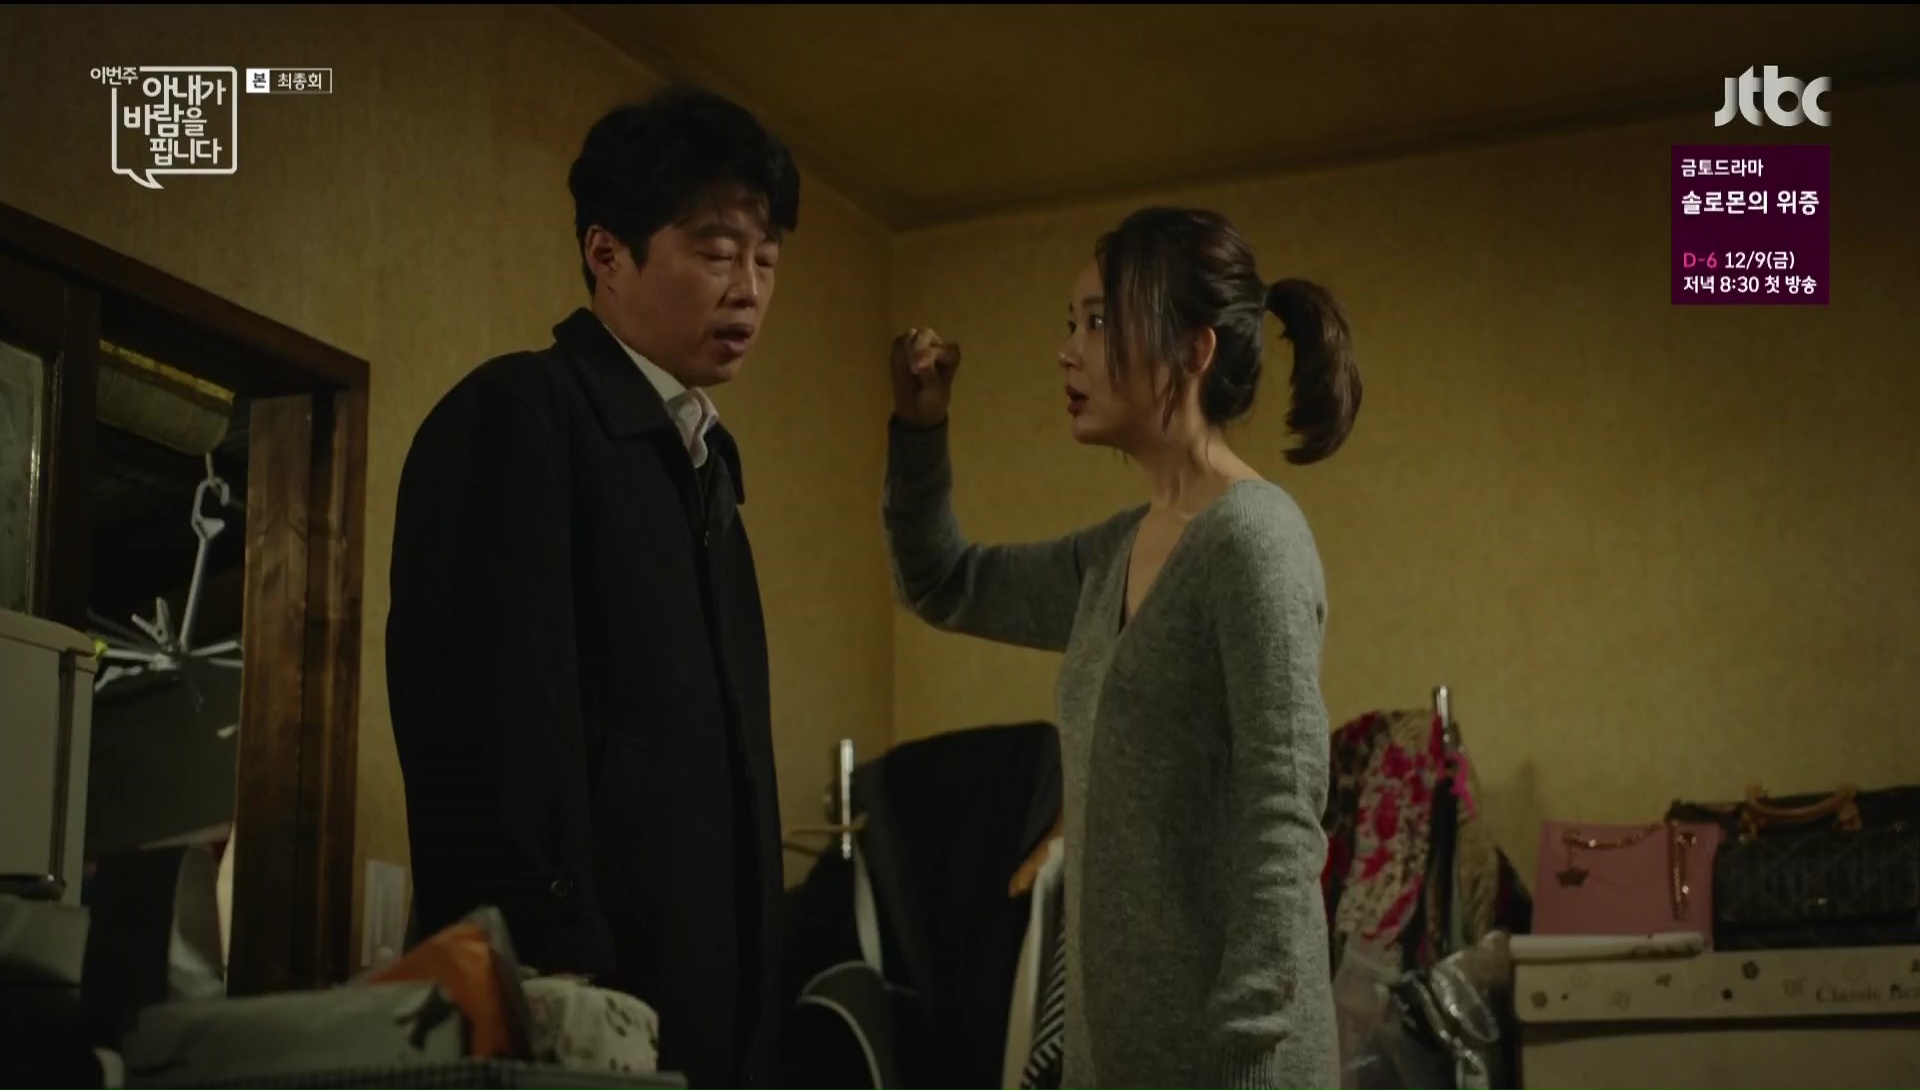 This Week, My Wife Will Have an Affair Episode 12 (Final) » Dramabeans Korean drama recaps